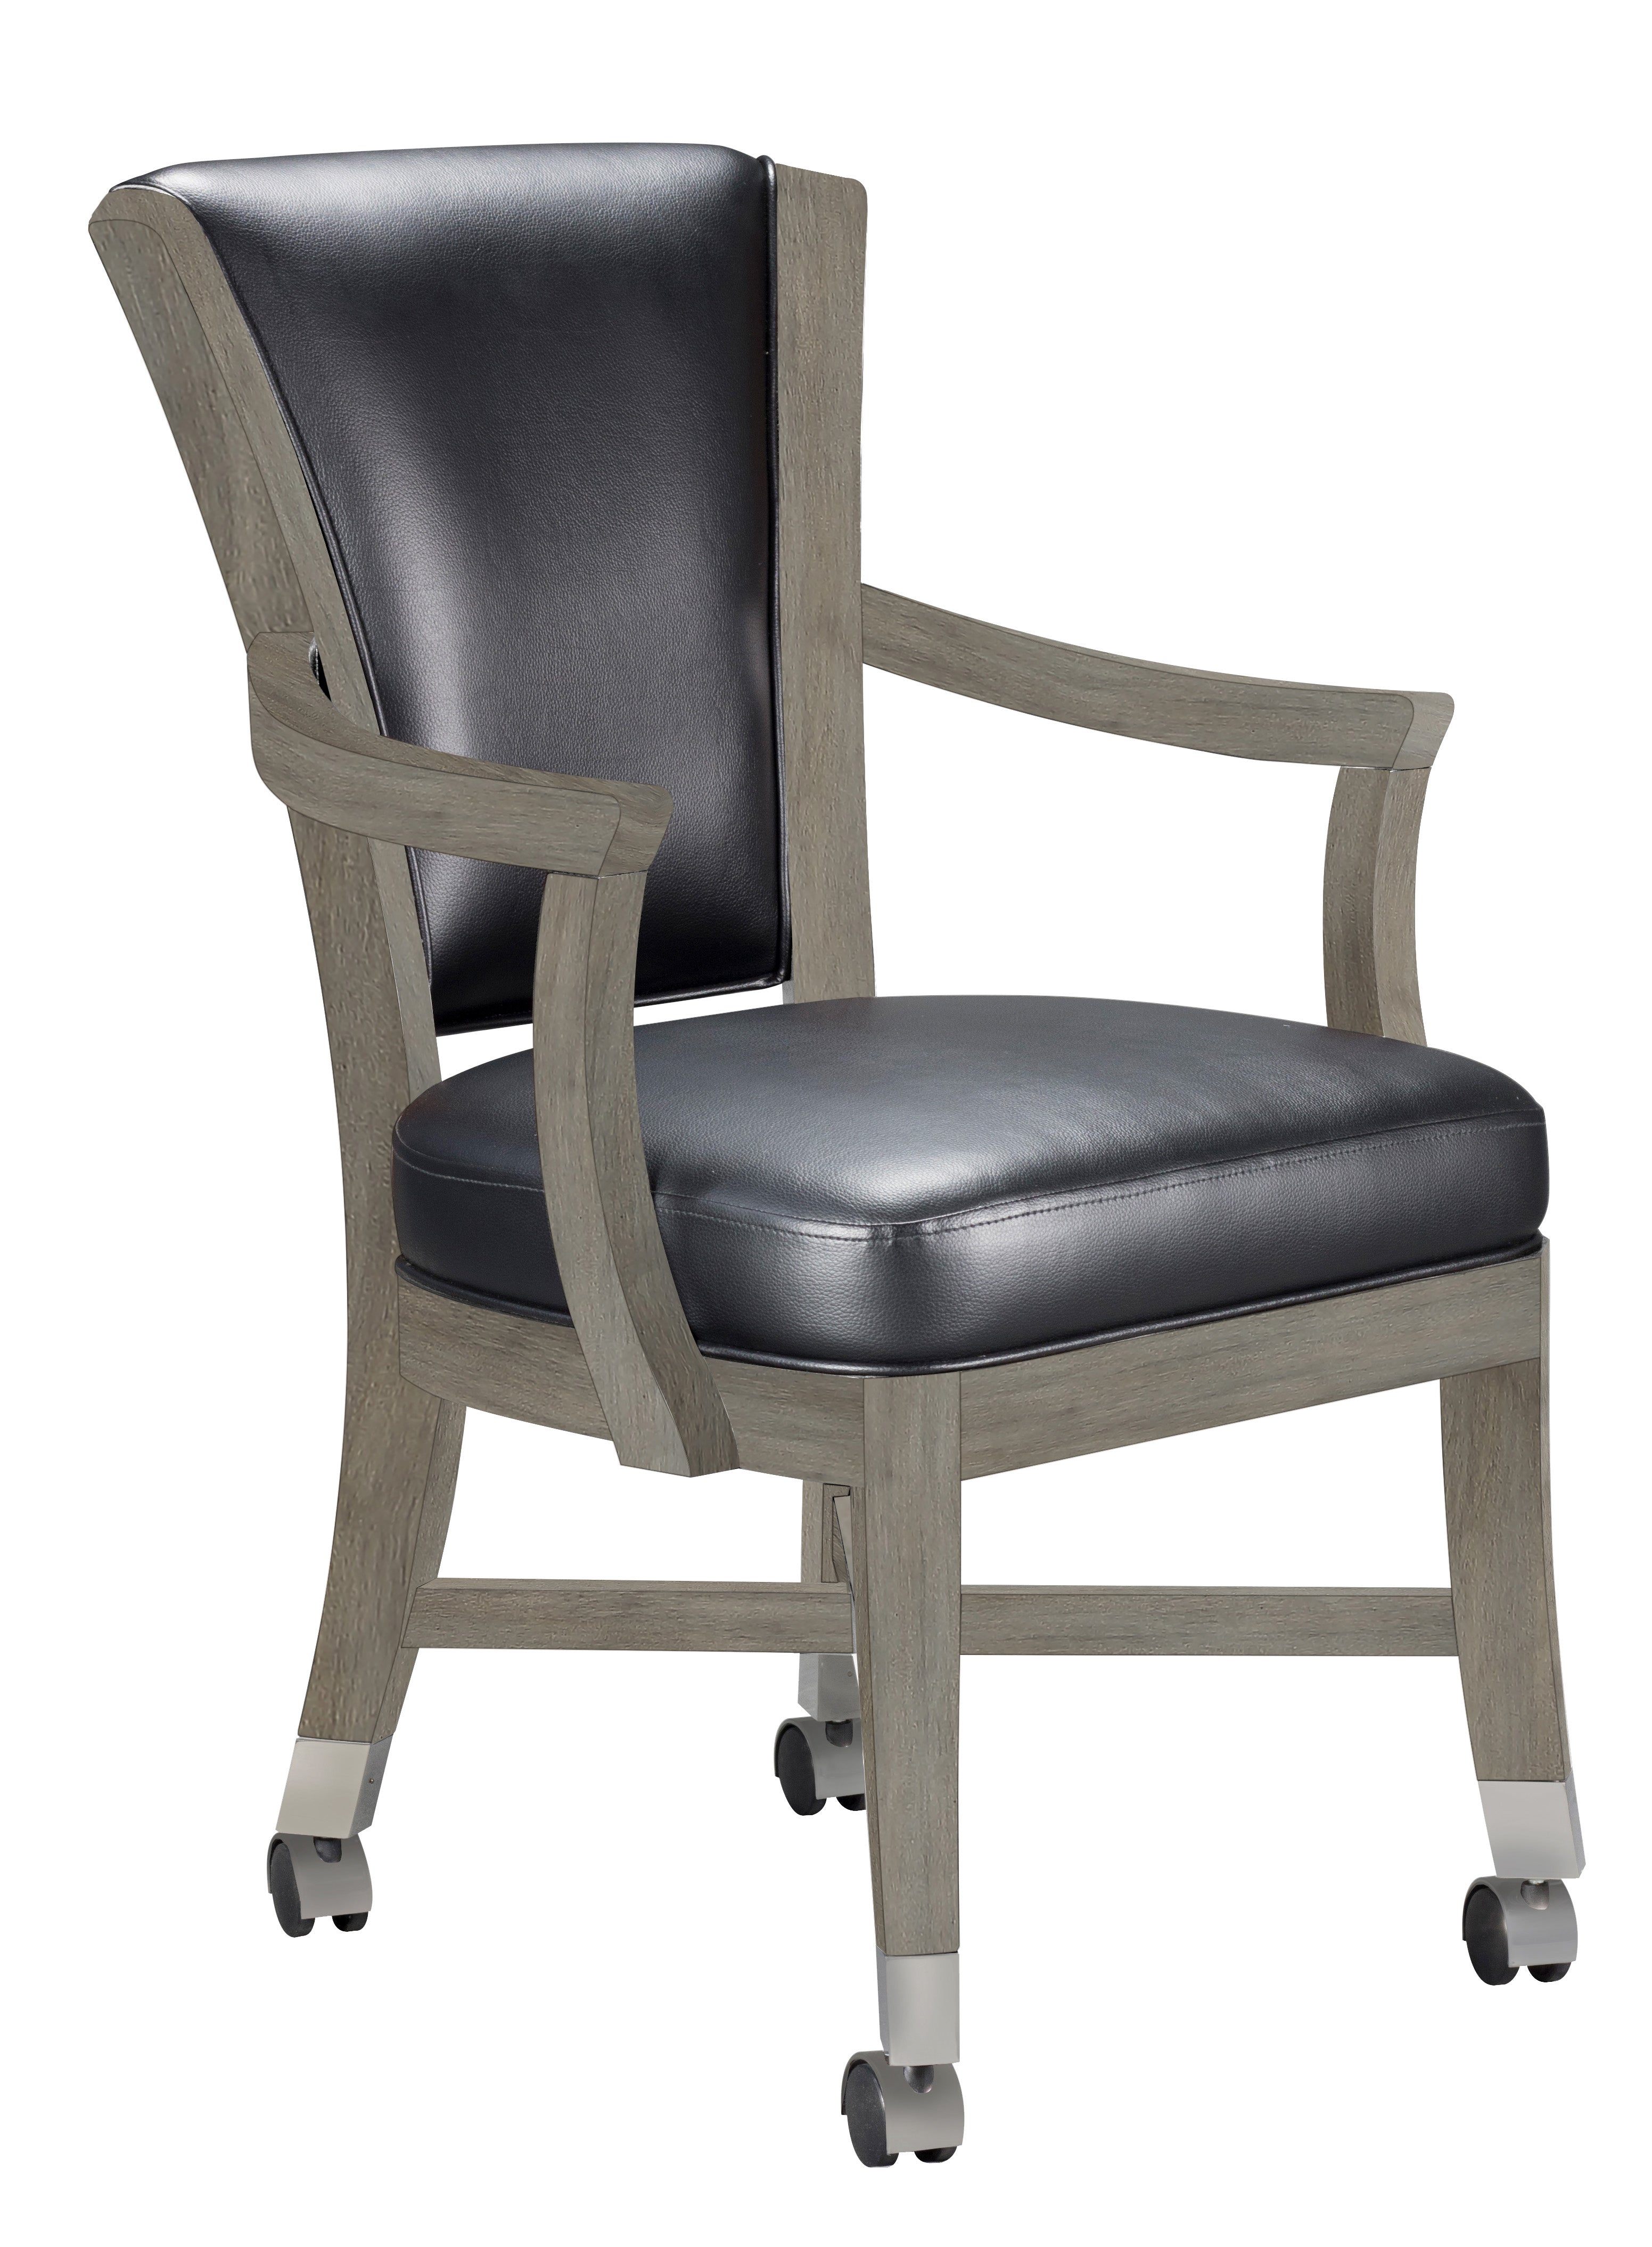 Legacy Billiards Elite Caster Game Chair in Overcast Finish